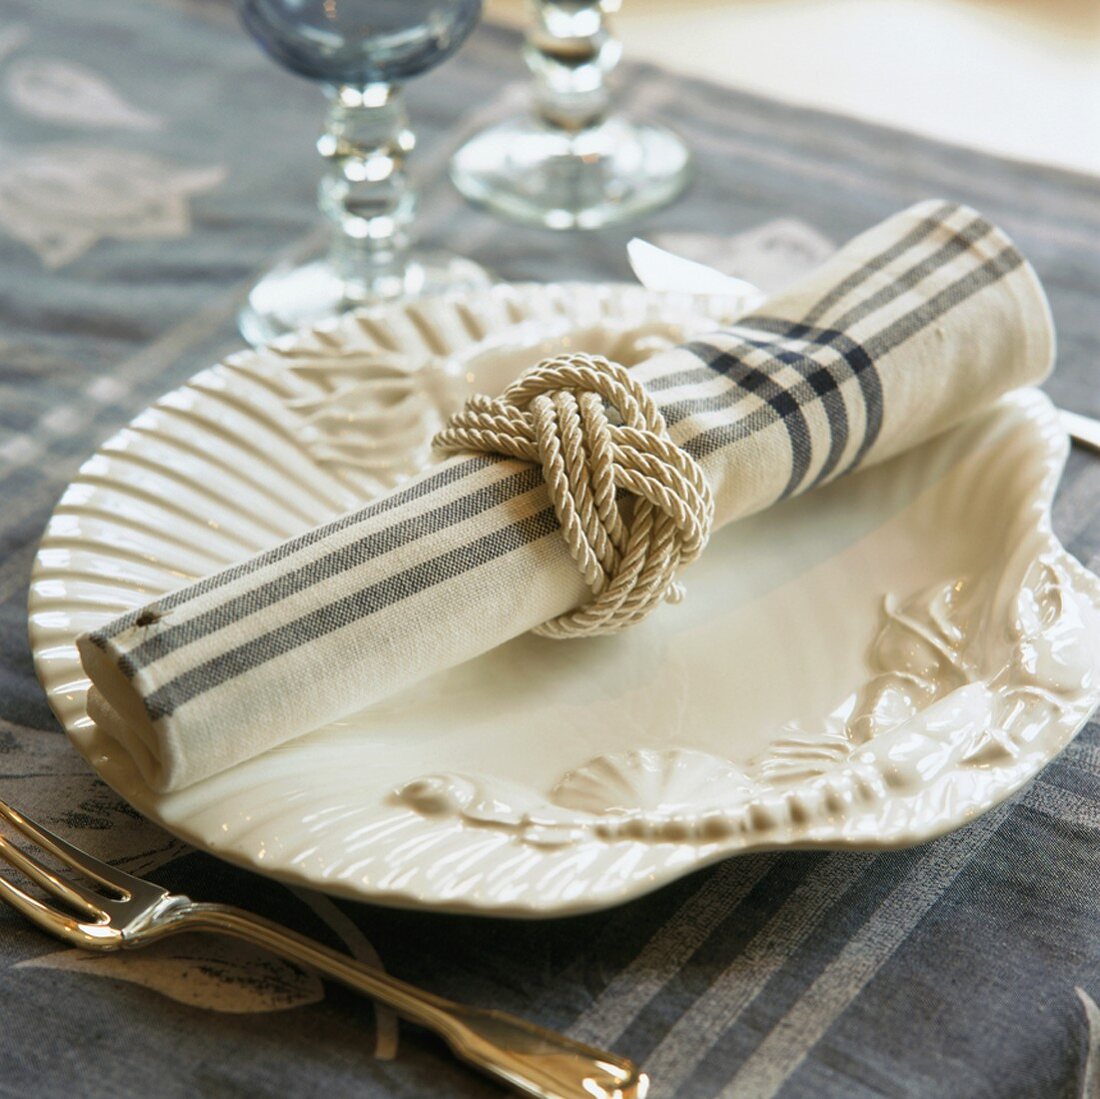 A place setting with a fabric napkin